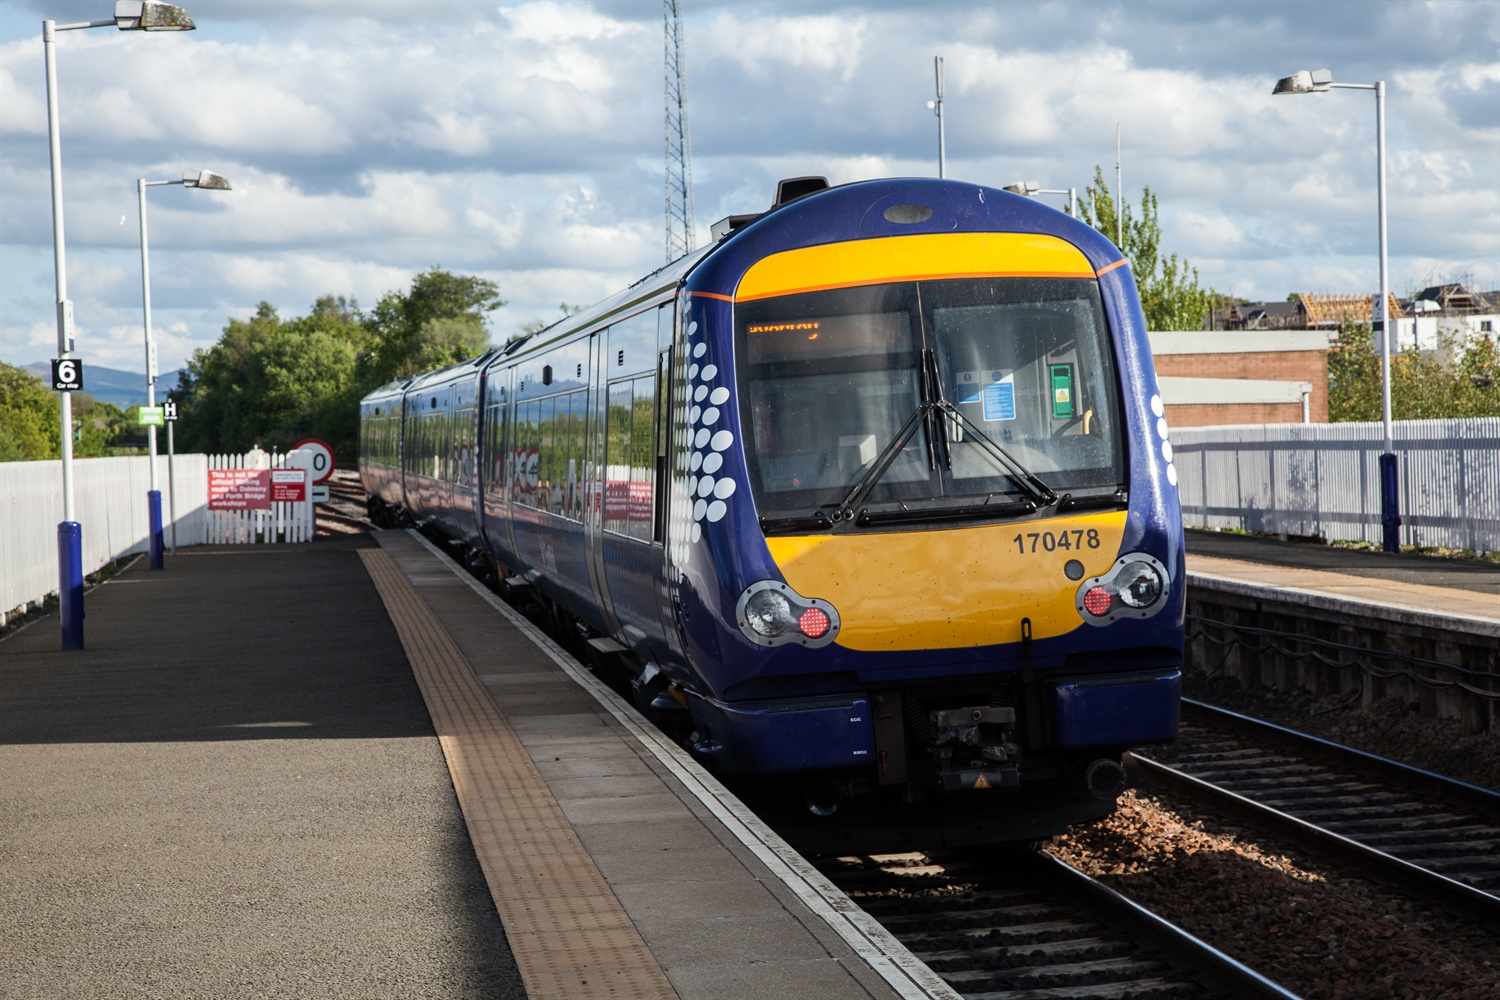 Unions launch campaign after closure notice served on 200-job Glasgow rail depot